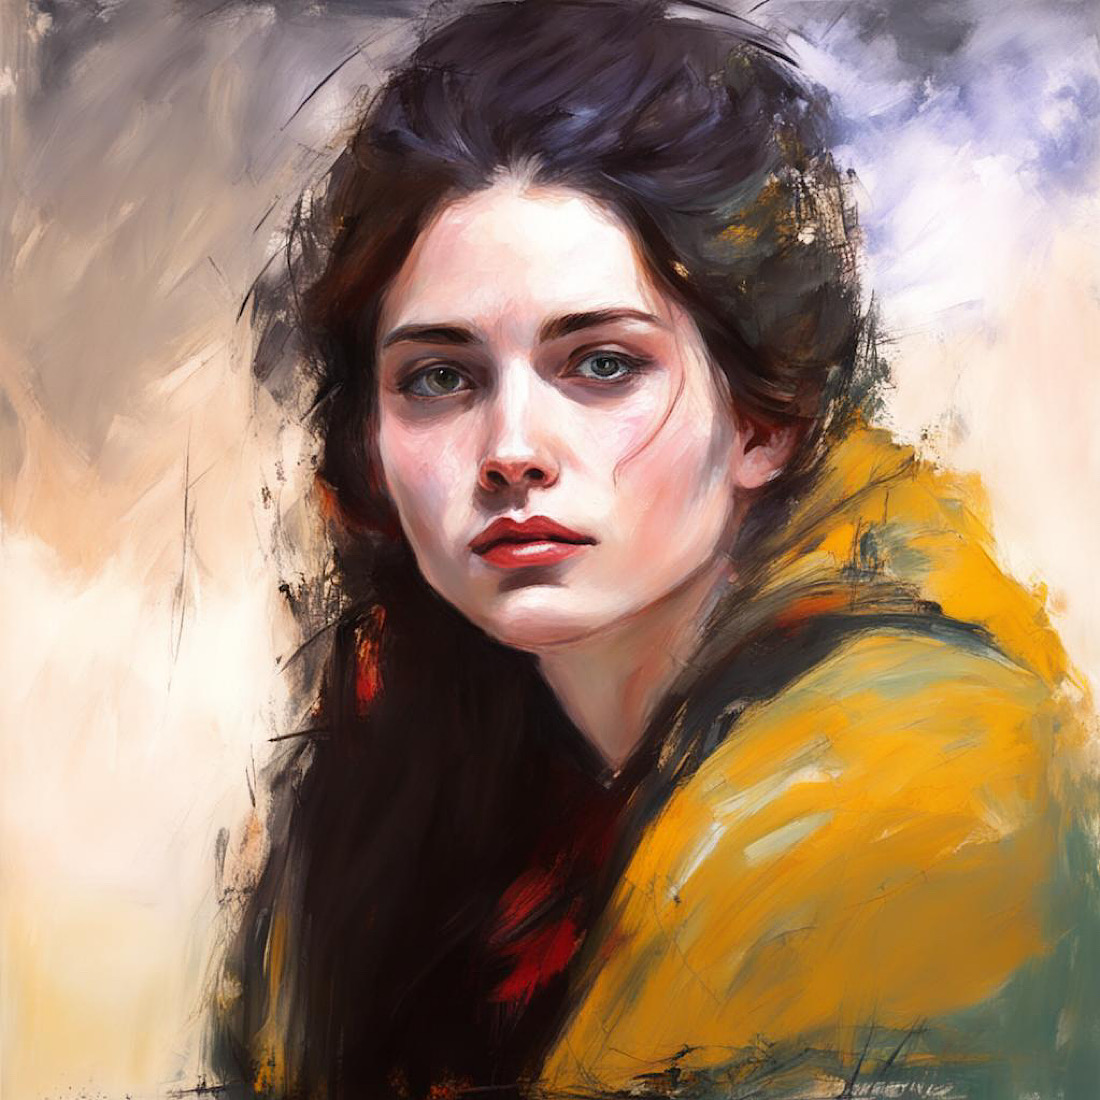 Oil painting "woman" cover image.